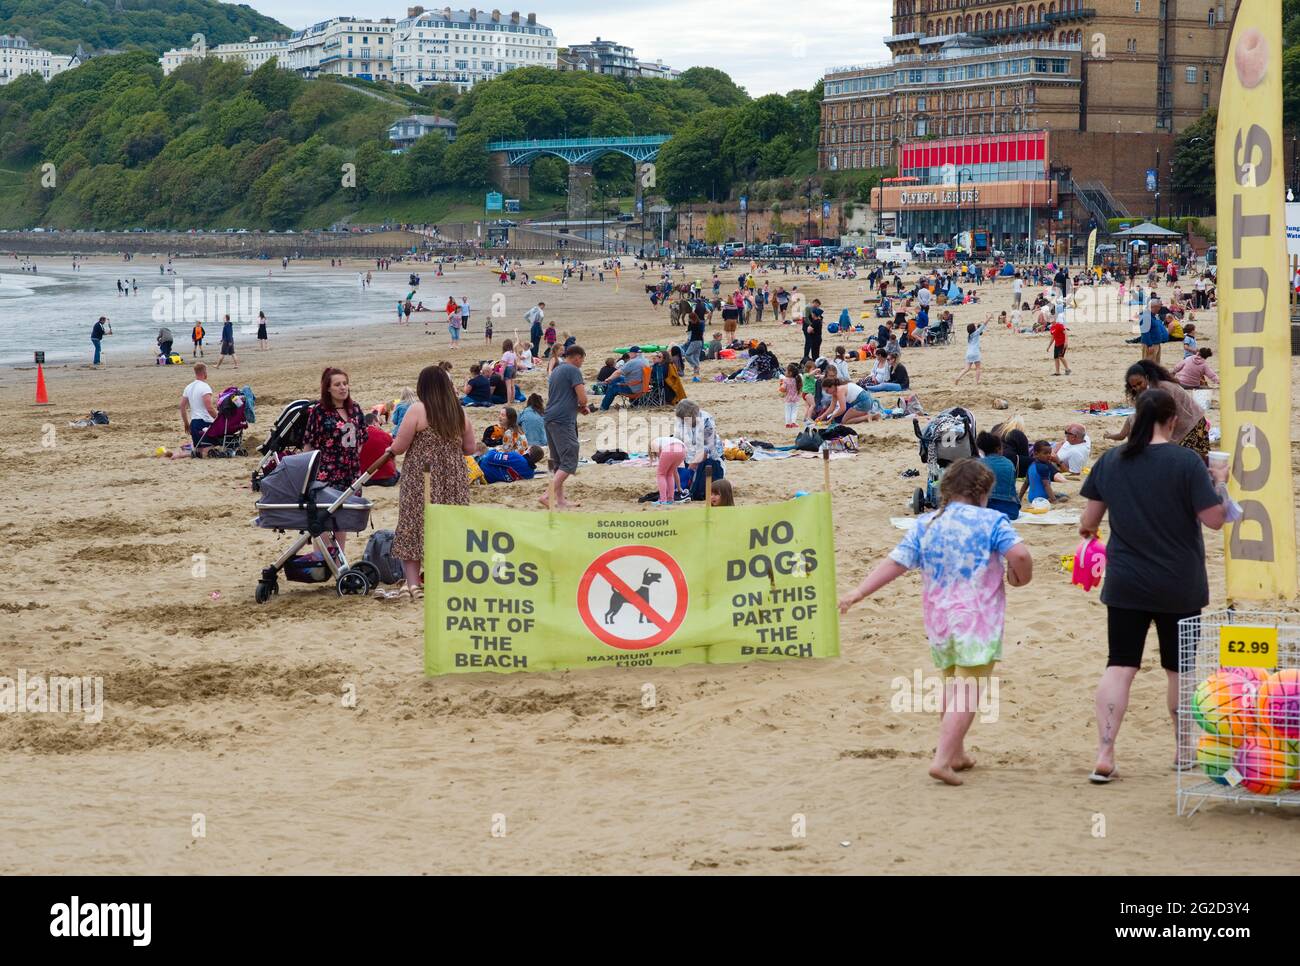 A busy Scarborough beach during half term of covid times with no dogs on beach sign Stock Photo